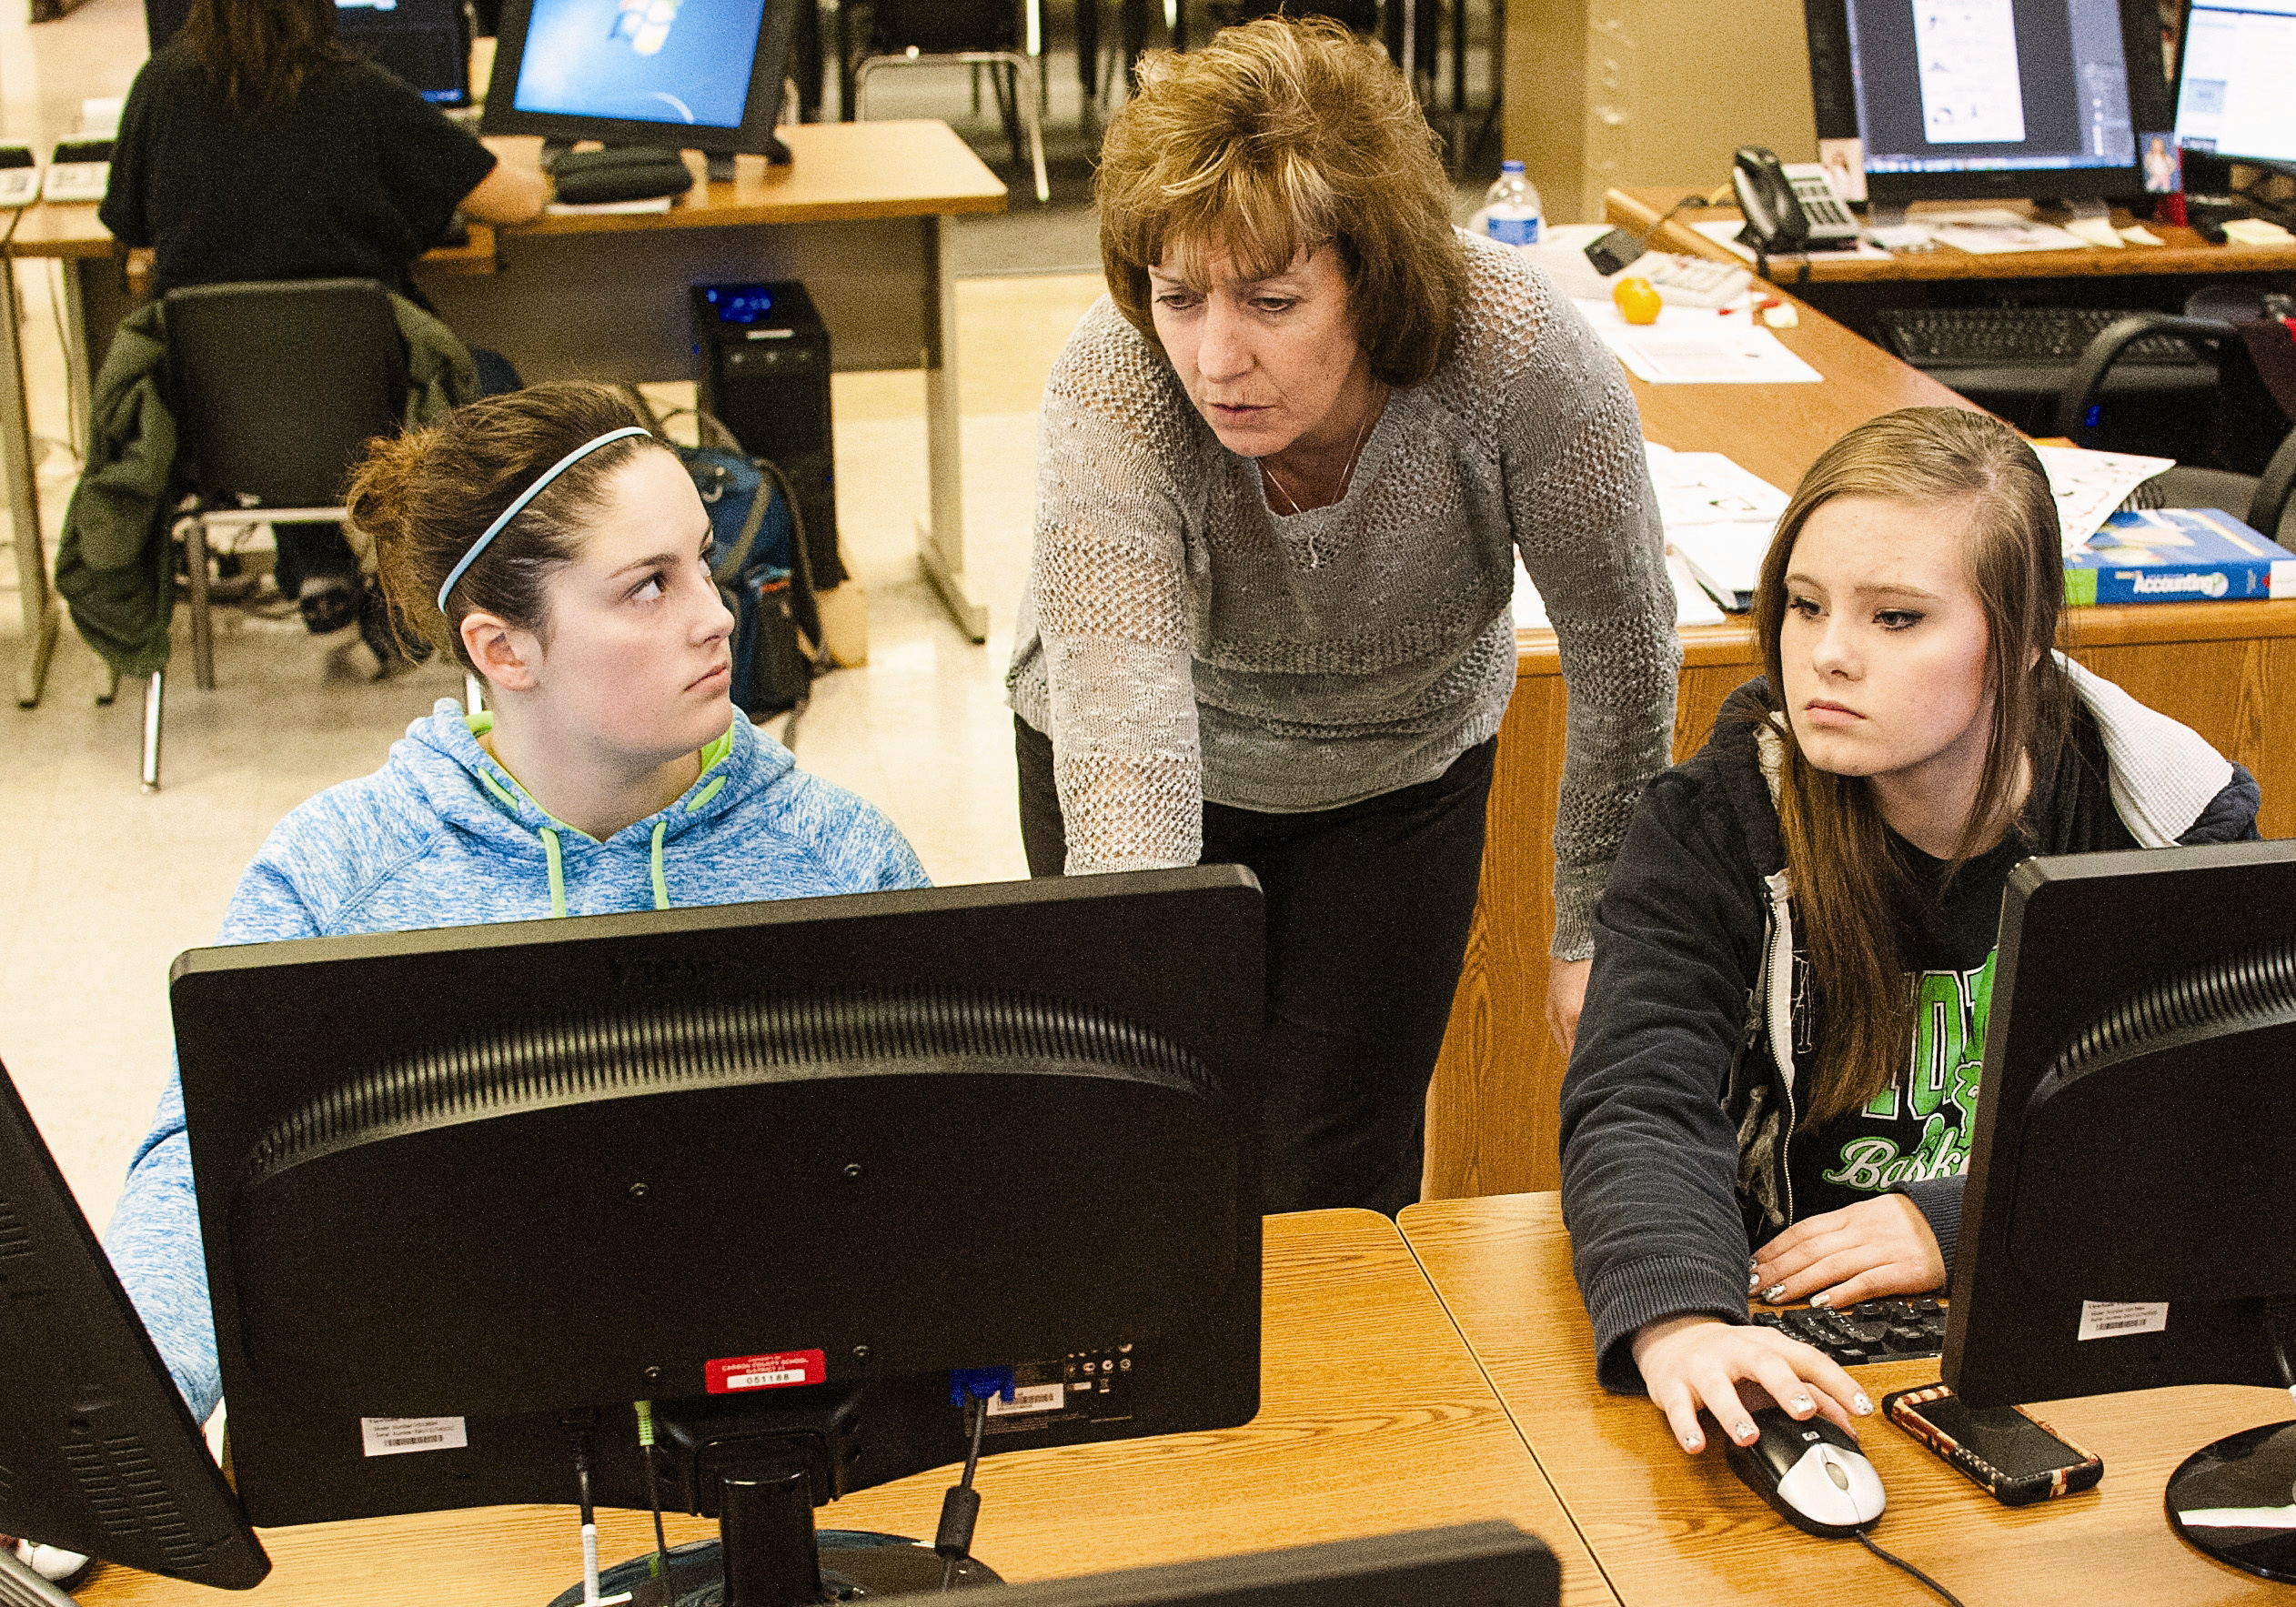 PHOTO: Rawlins High School teacher Valerie Jennings, center, gives advice to Paden Waller, left, and Lexie Michel, who are coding their own 3D Frogger game, in Rawlins, Wyo., on Dec. 11, 2014.